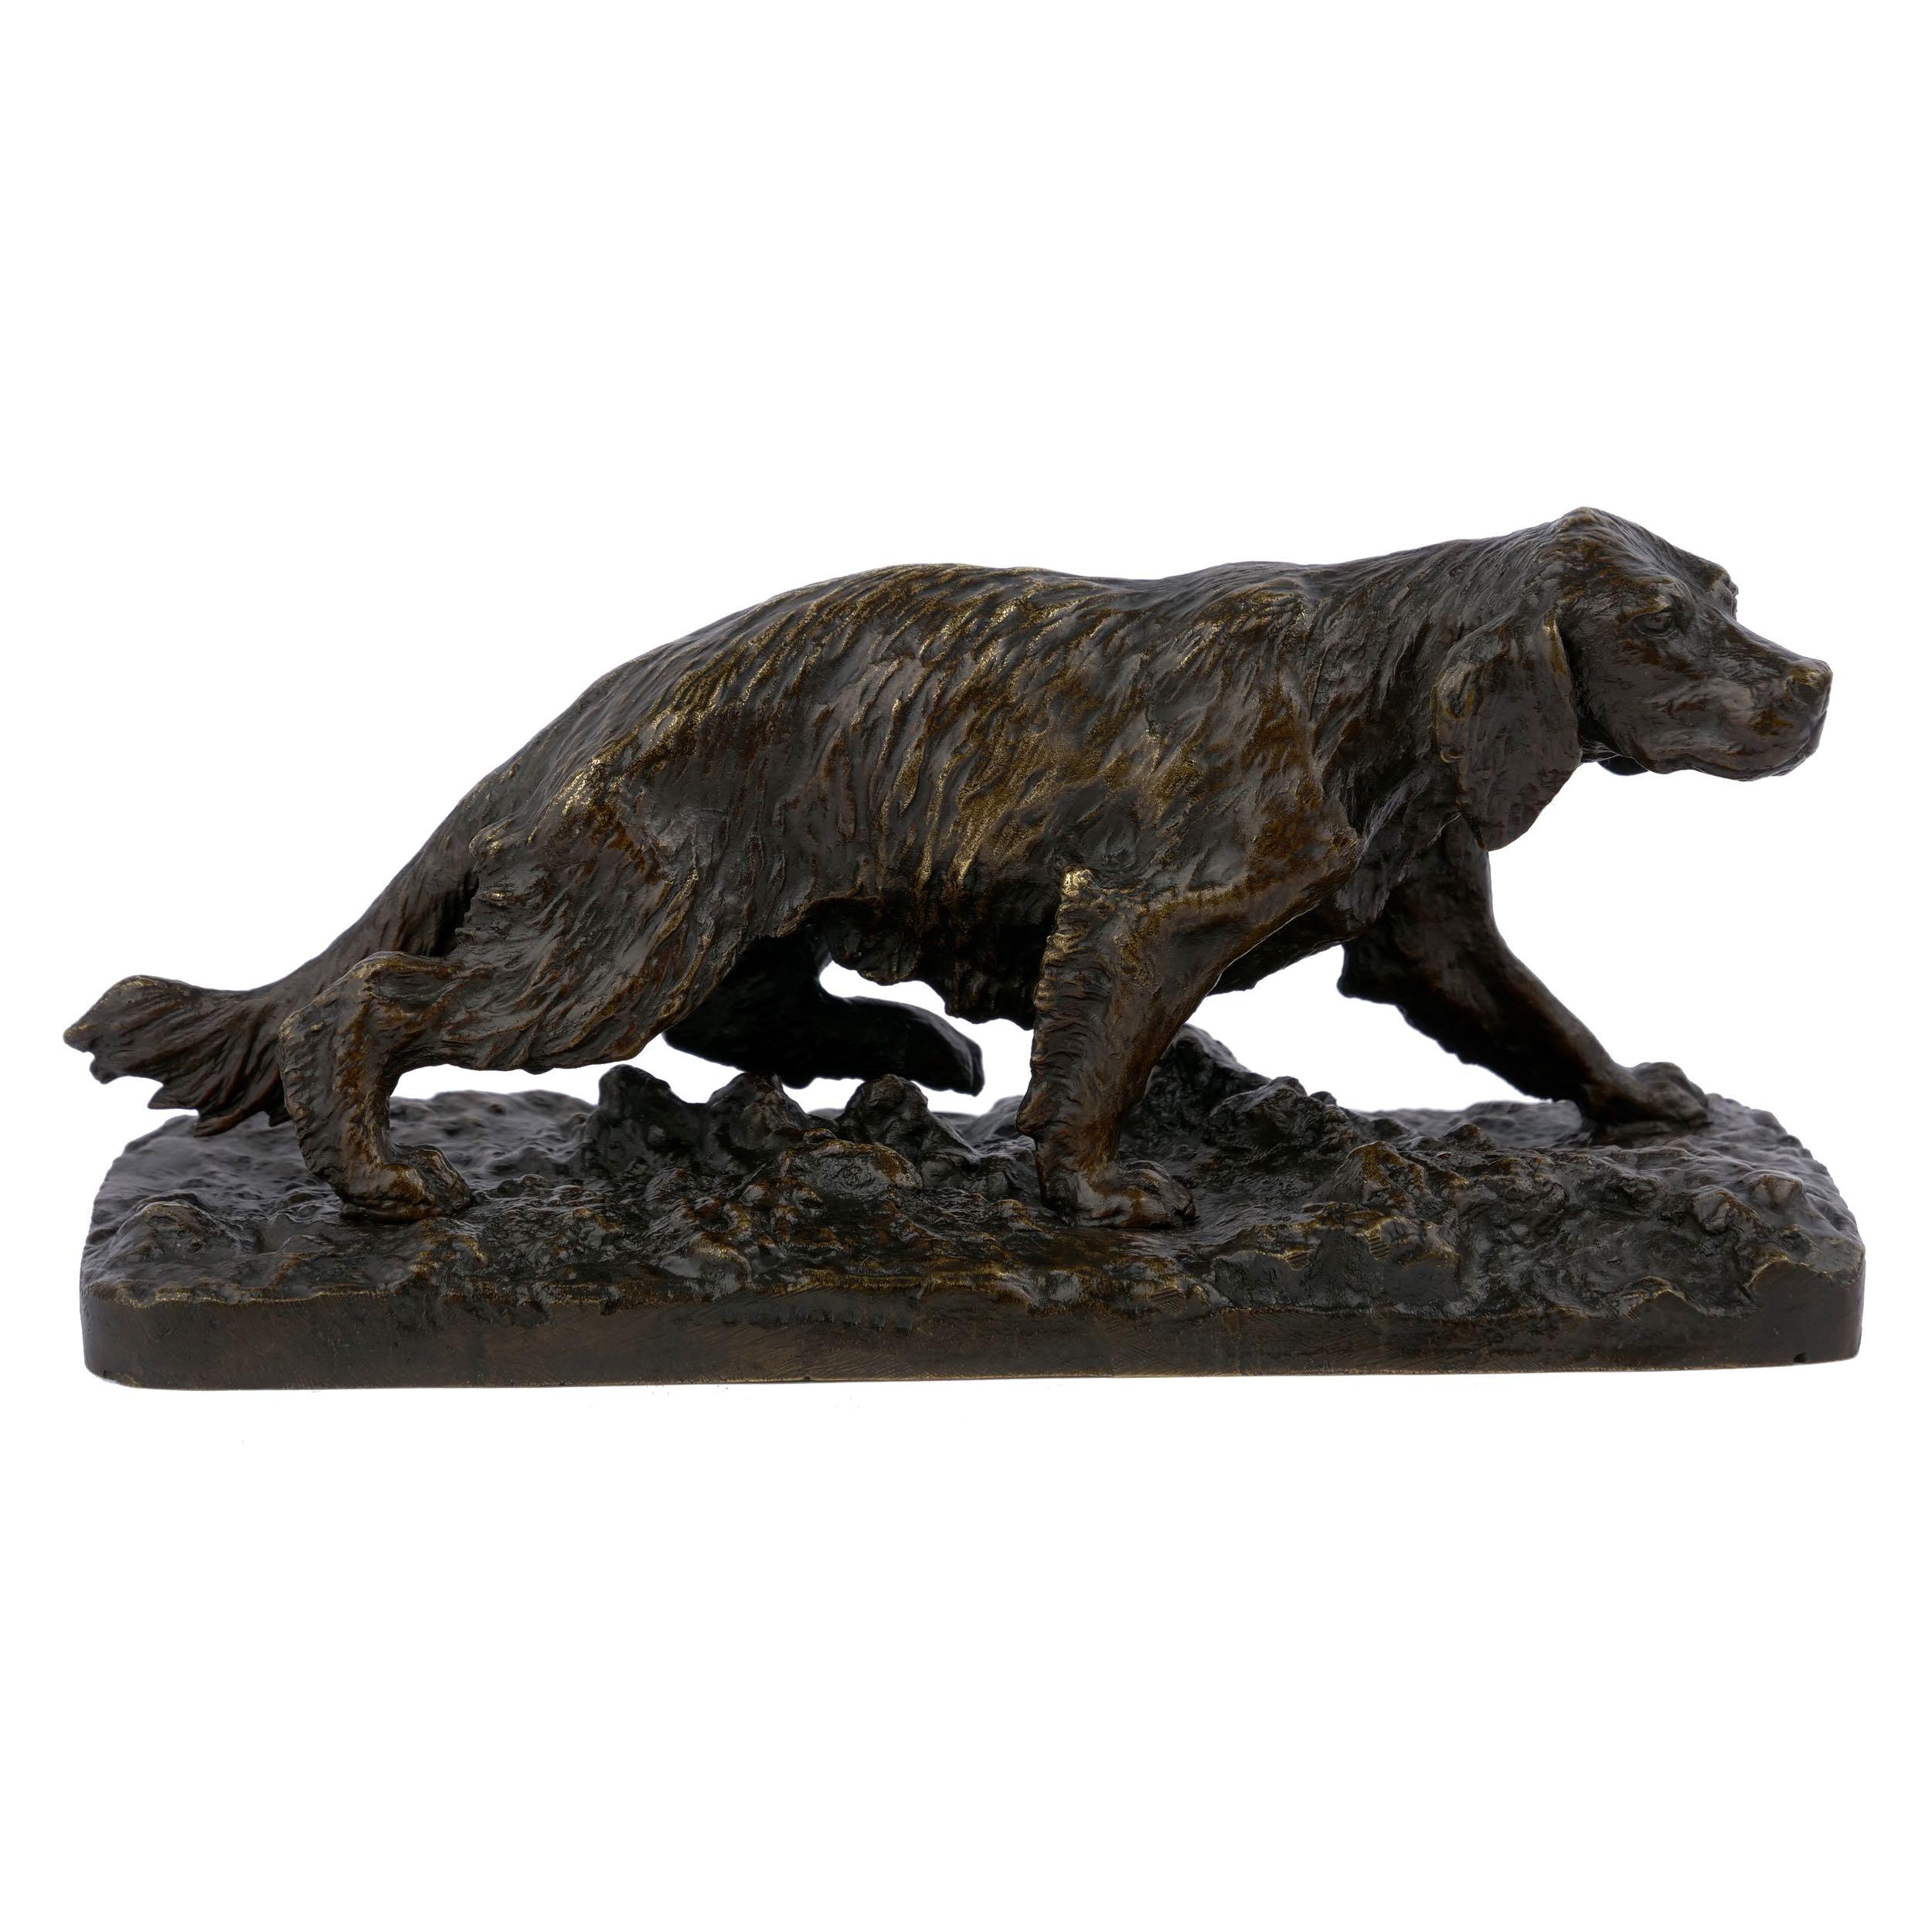 A very fine model of a French Spaniel, the quality of the casting is noteworthy with an exquisitely finished surface and fine chiseled detail throughout. Typical of Fratin's work, the model is beautifully textured with a great sense of movement and